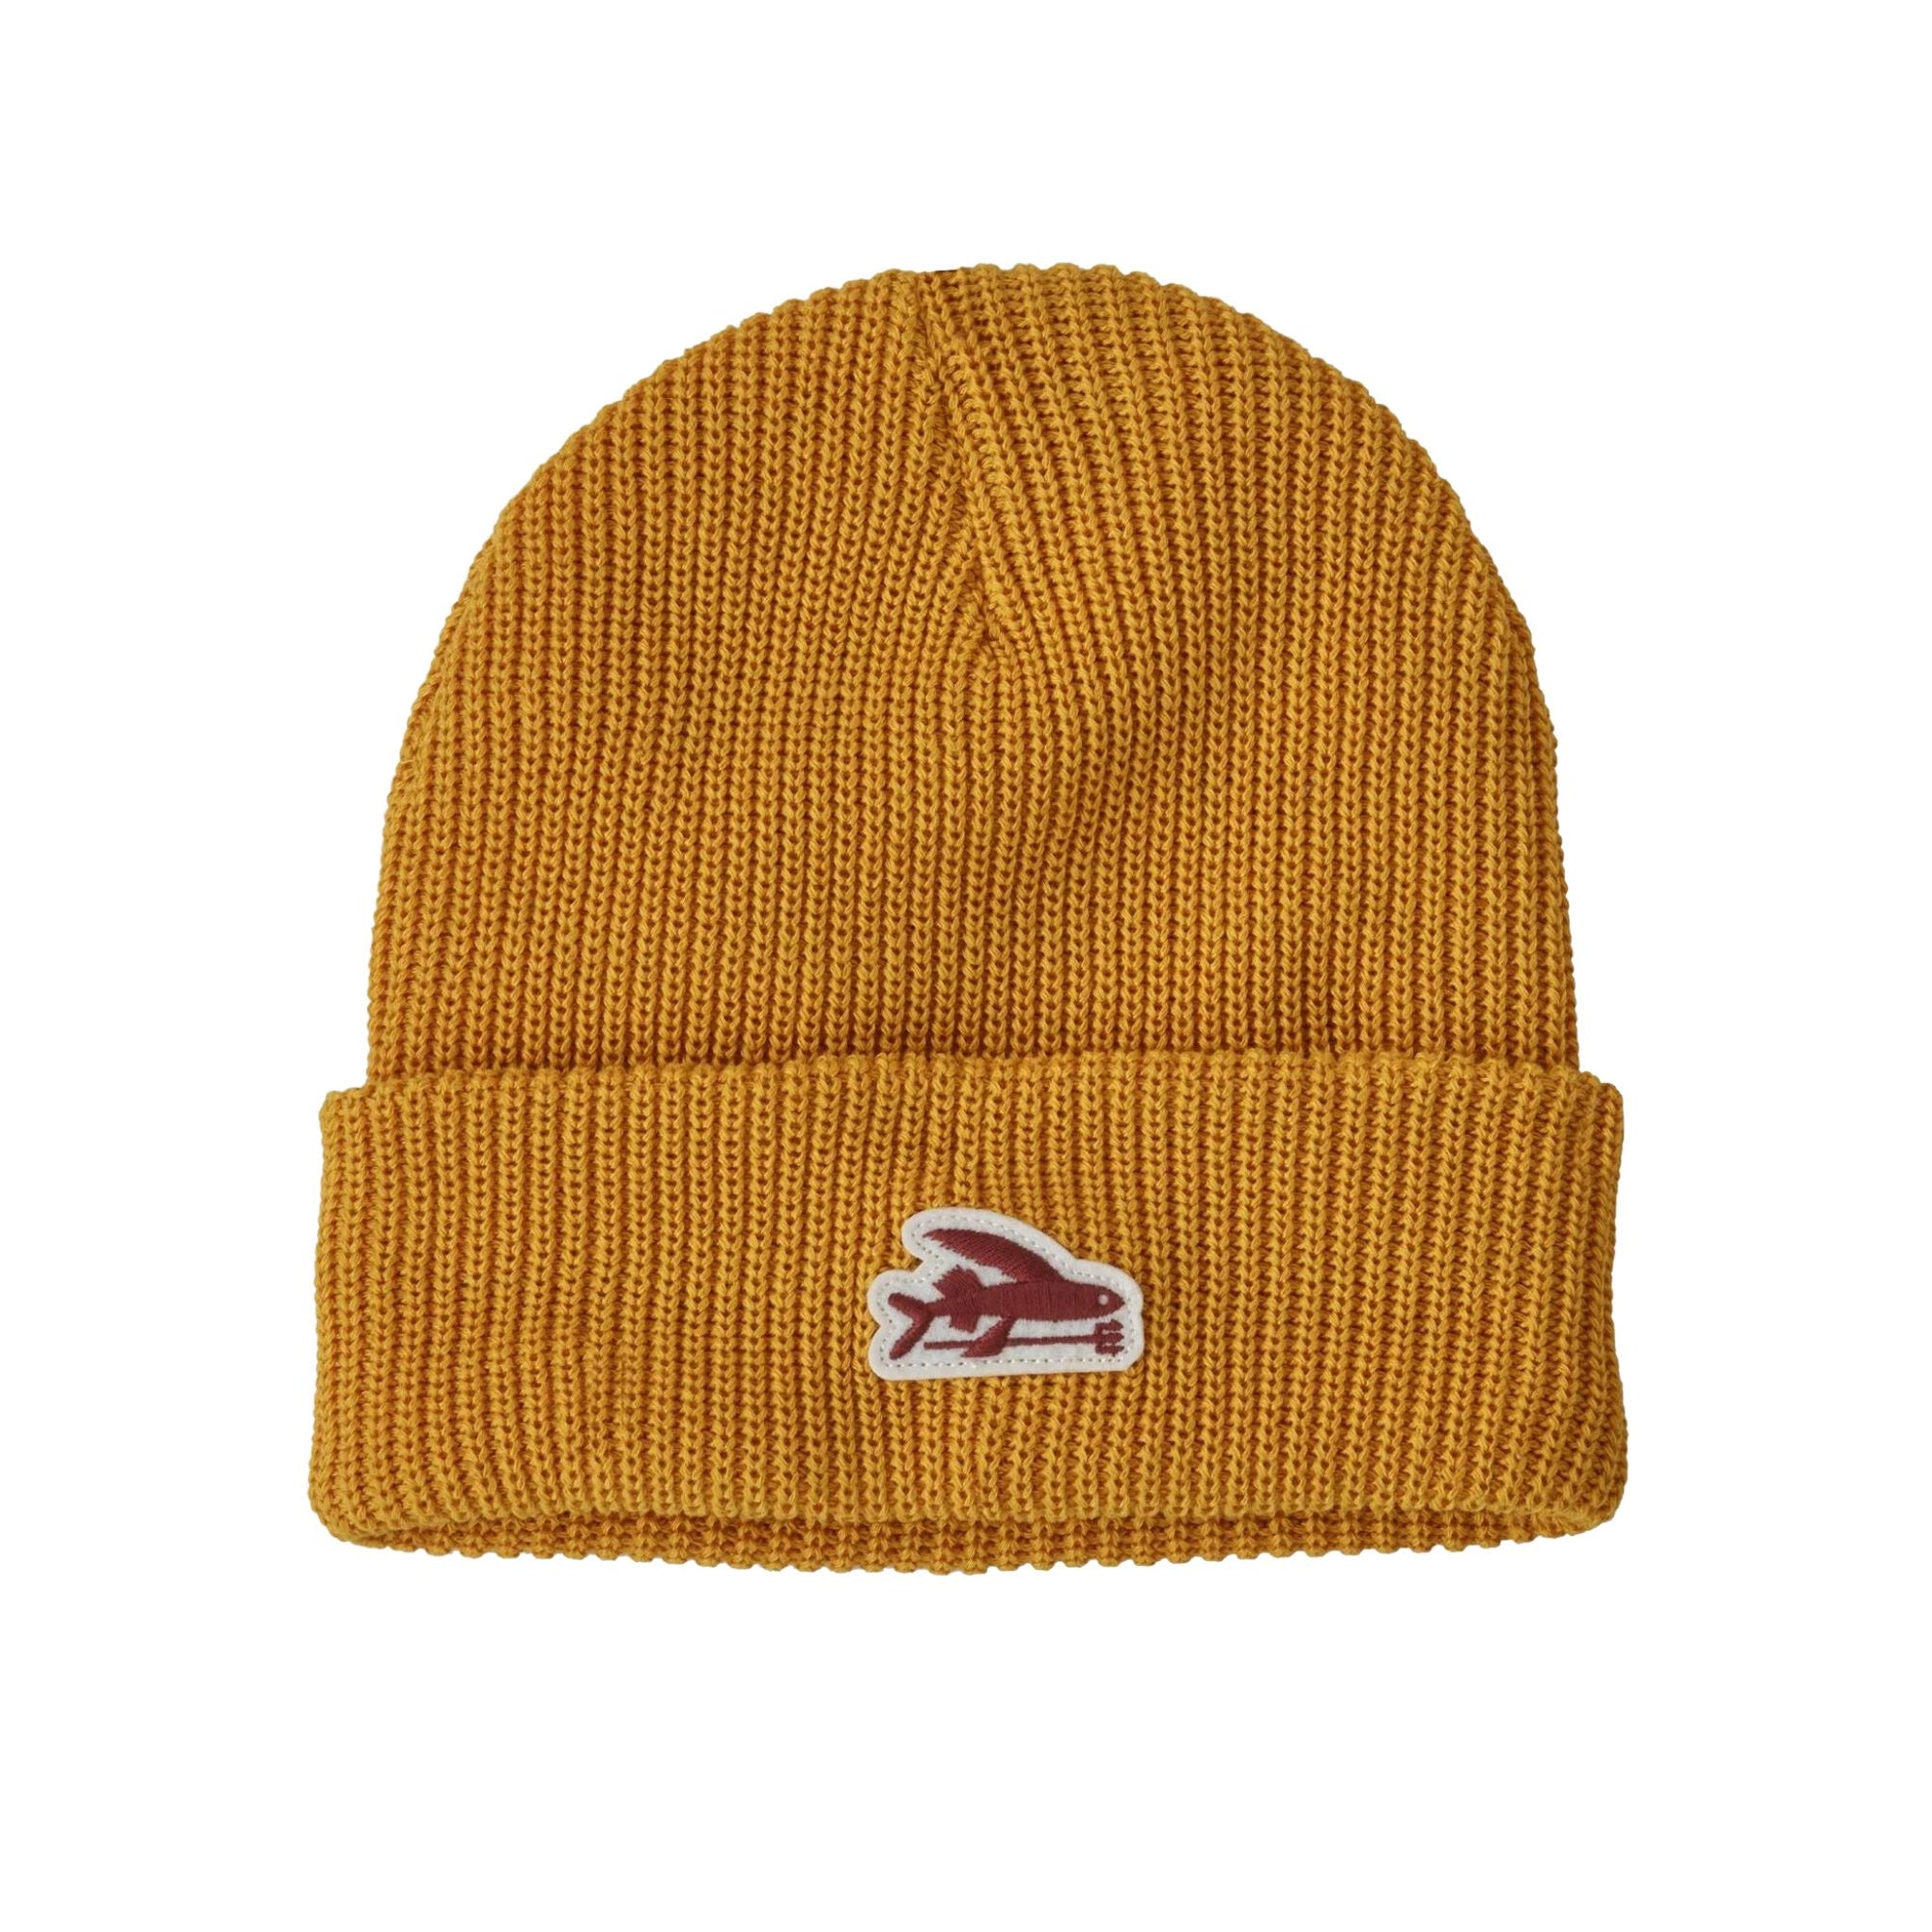 Kids Patagonia Logo Beanie - Cabin Gold with Flying Fish Patch Beanies Patagonia 